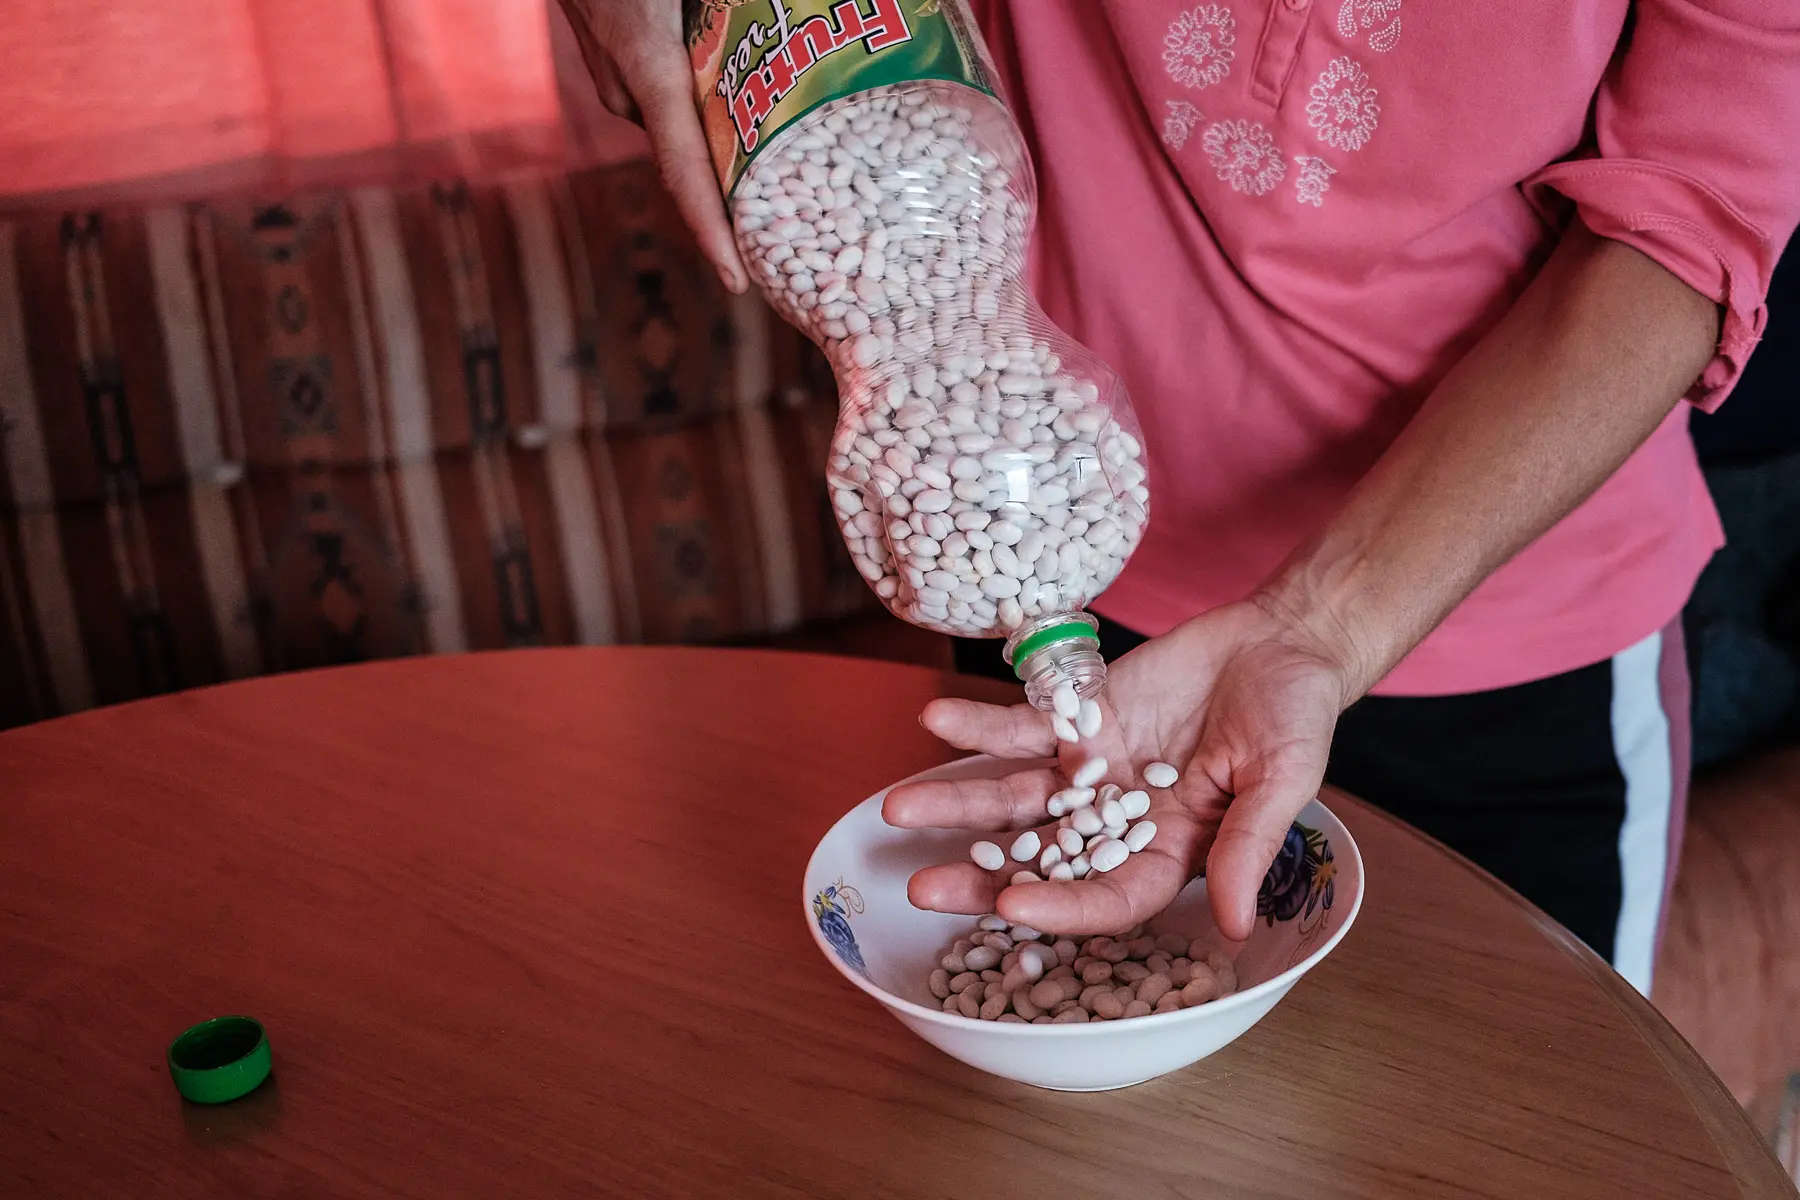 Paula pours dried beans from a recycled plastic soda bottle into a bowl